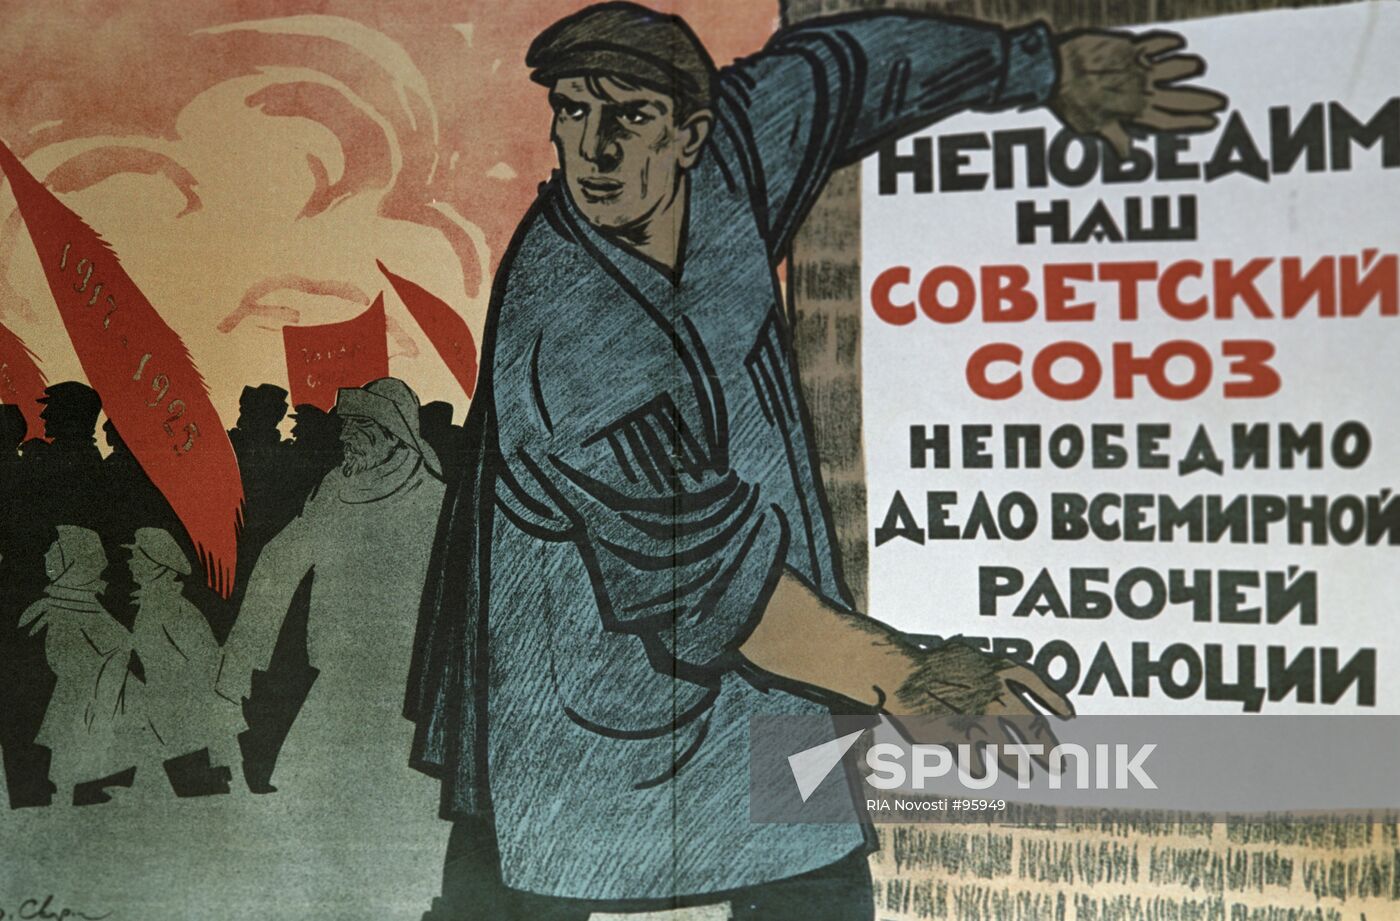 "OUR SOVIET UNION IS INVINCIBLE" POSTER